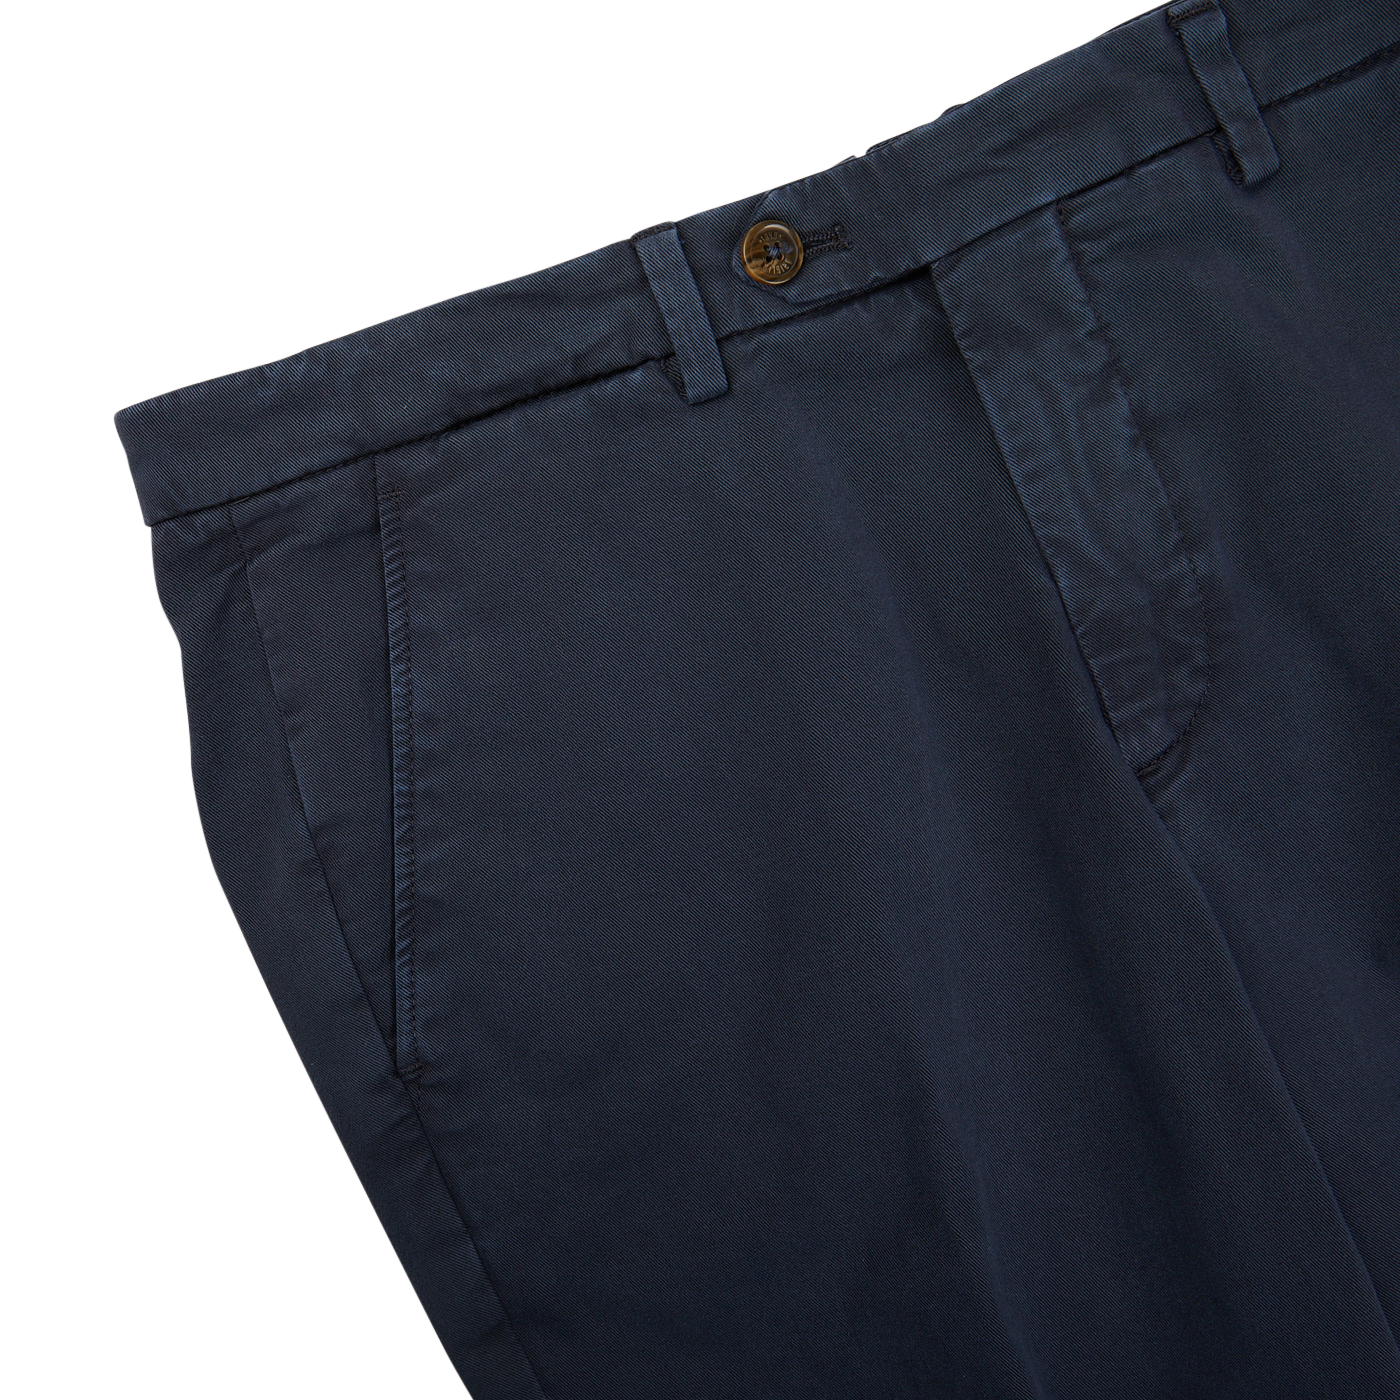 The men's Navy Blue Cotton Stretch BG62 Casual Chinos, by the Italian trouser specialist Briglia.